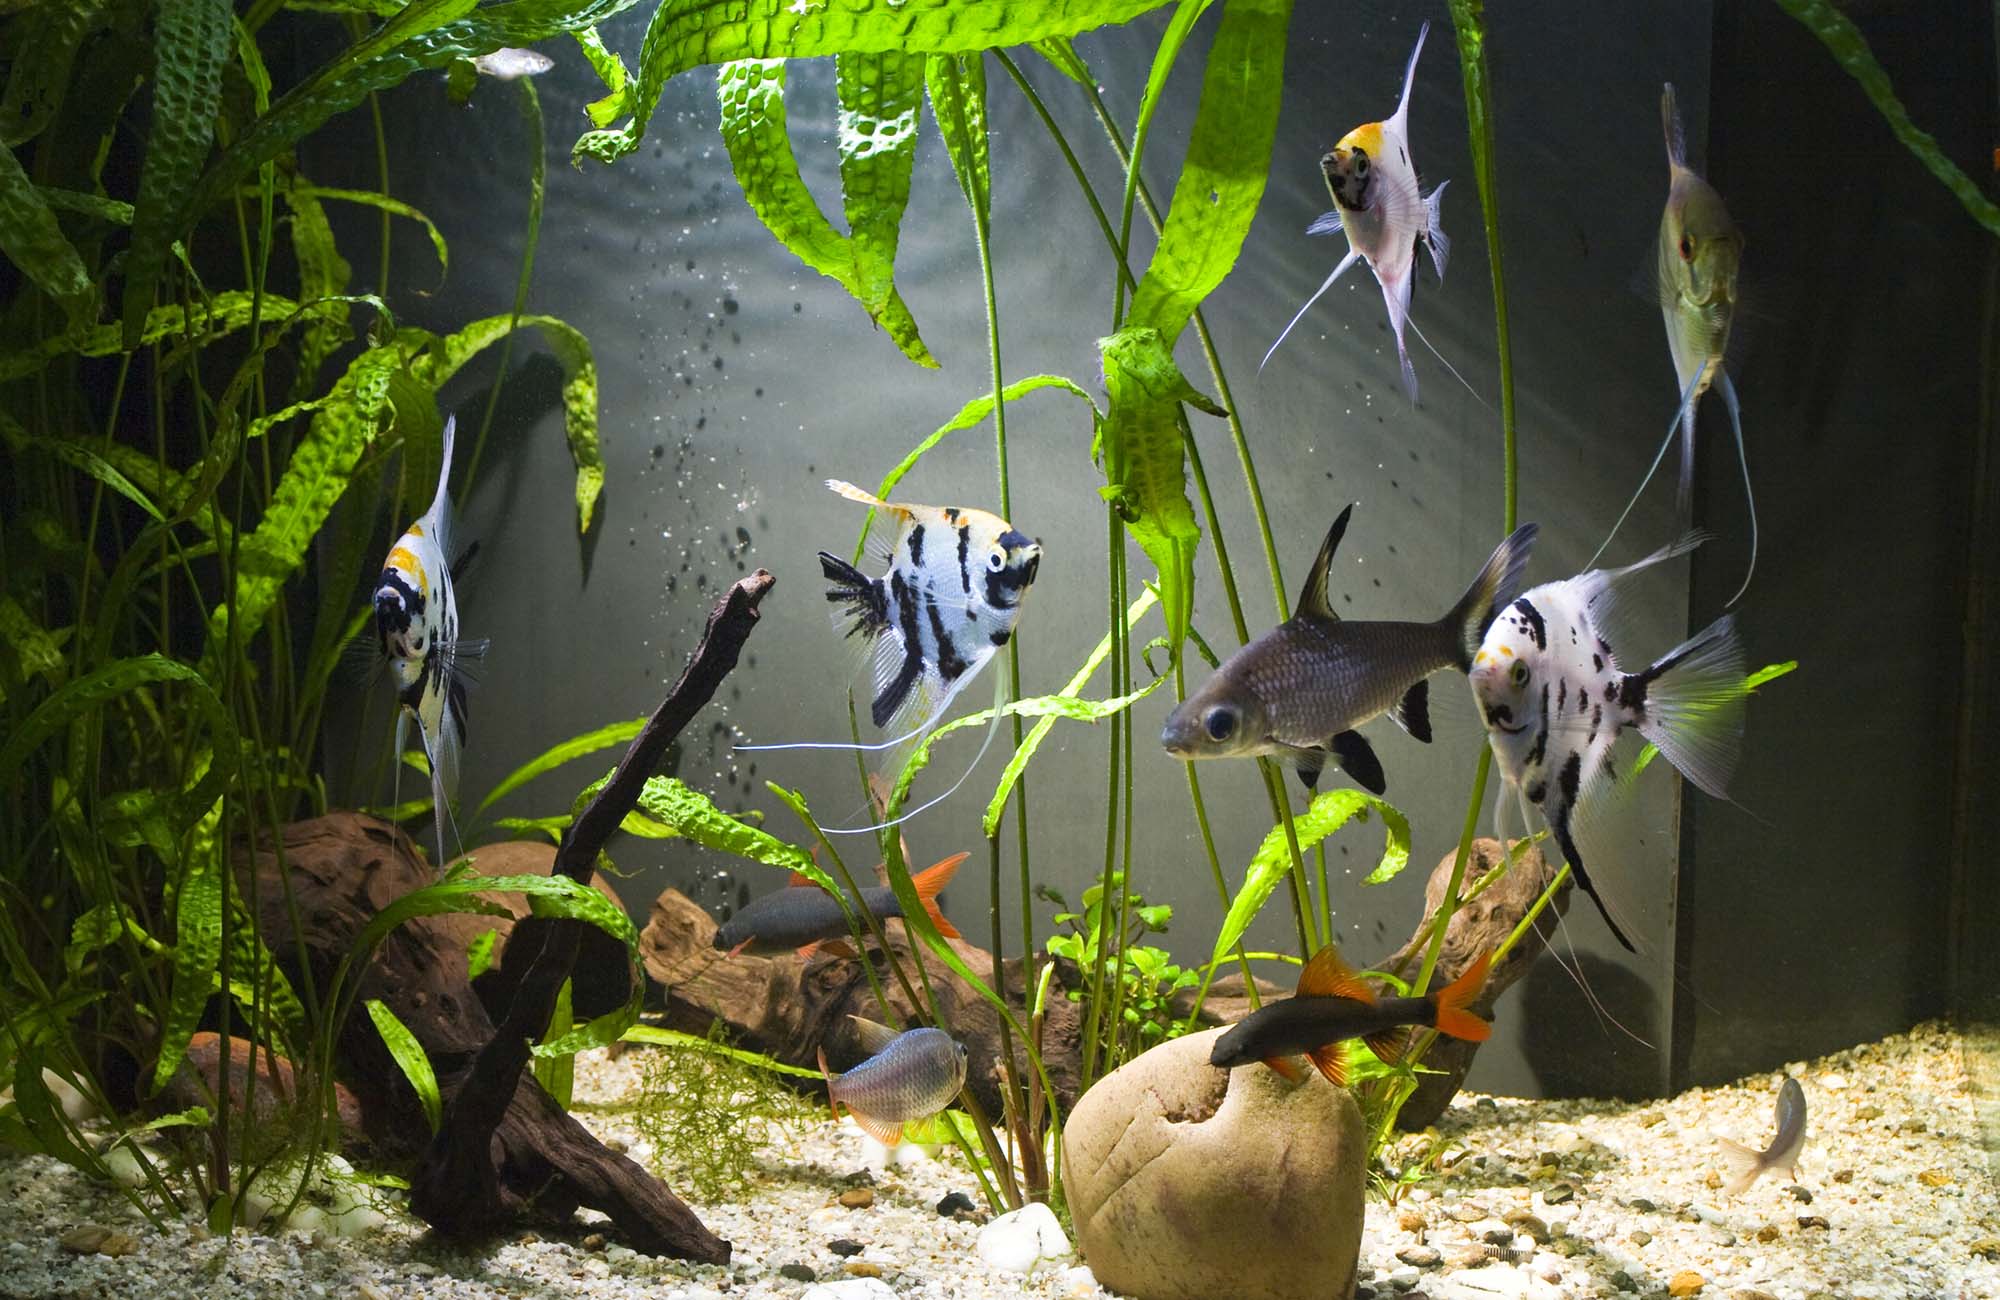 Tropical freshwater aquarium with colourful fish and green plants